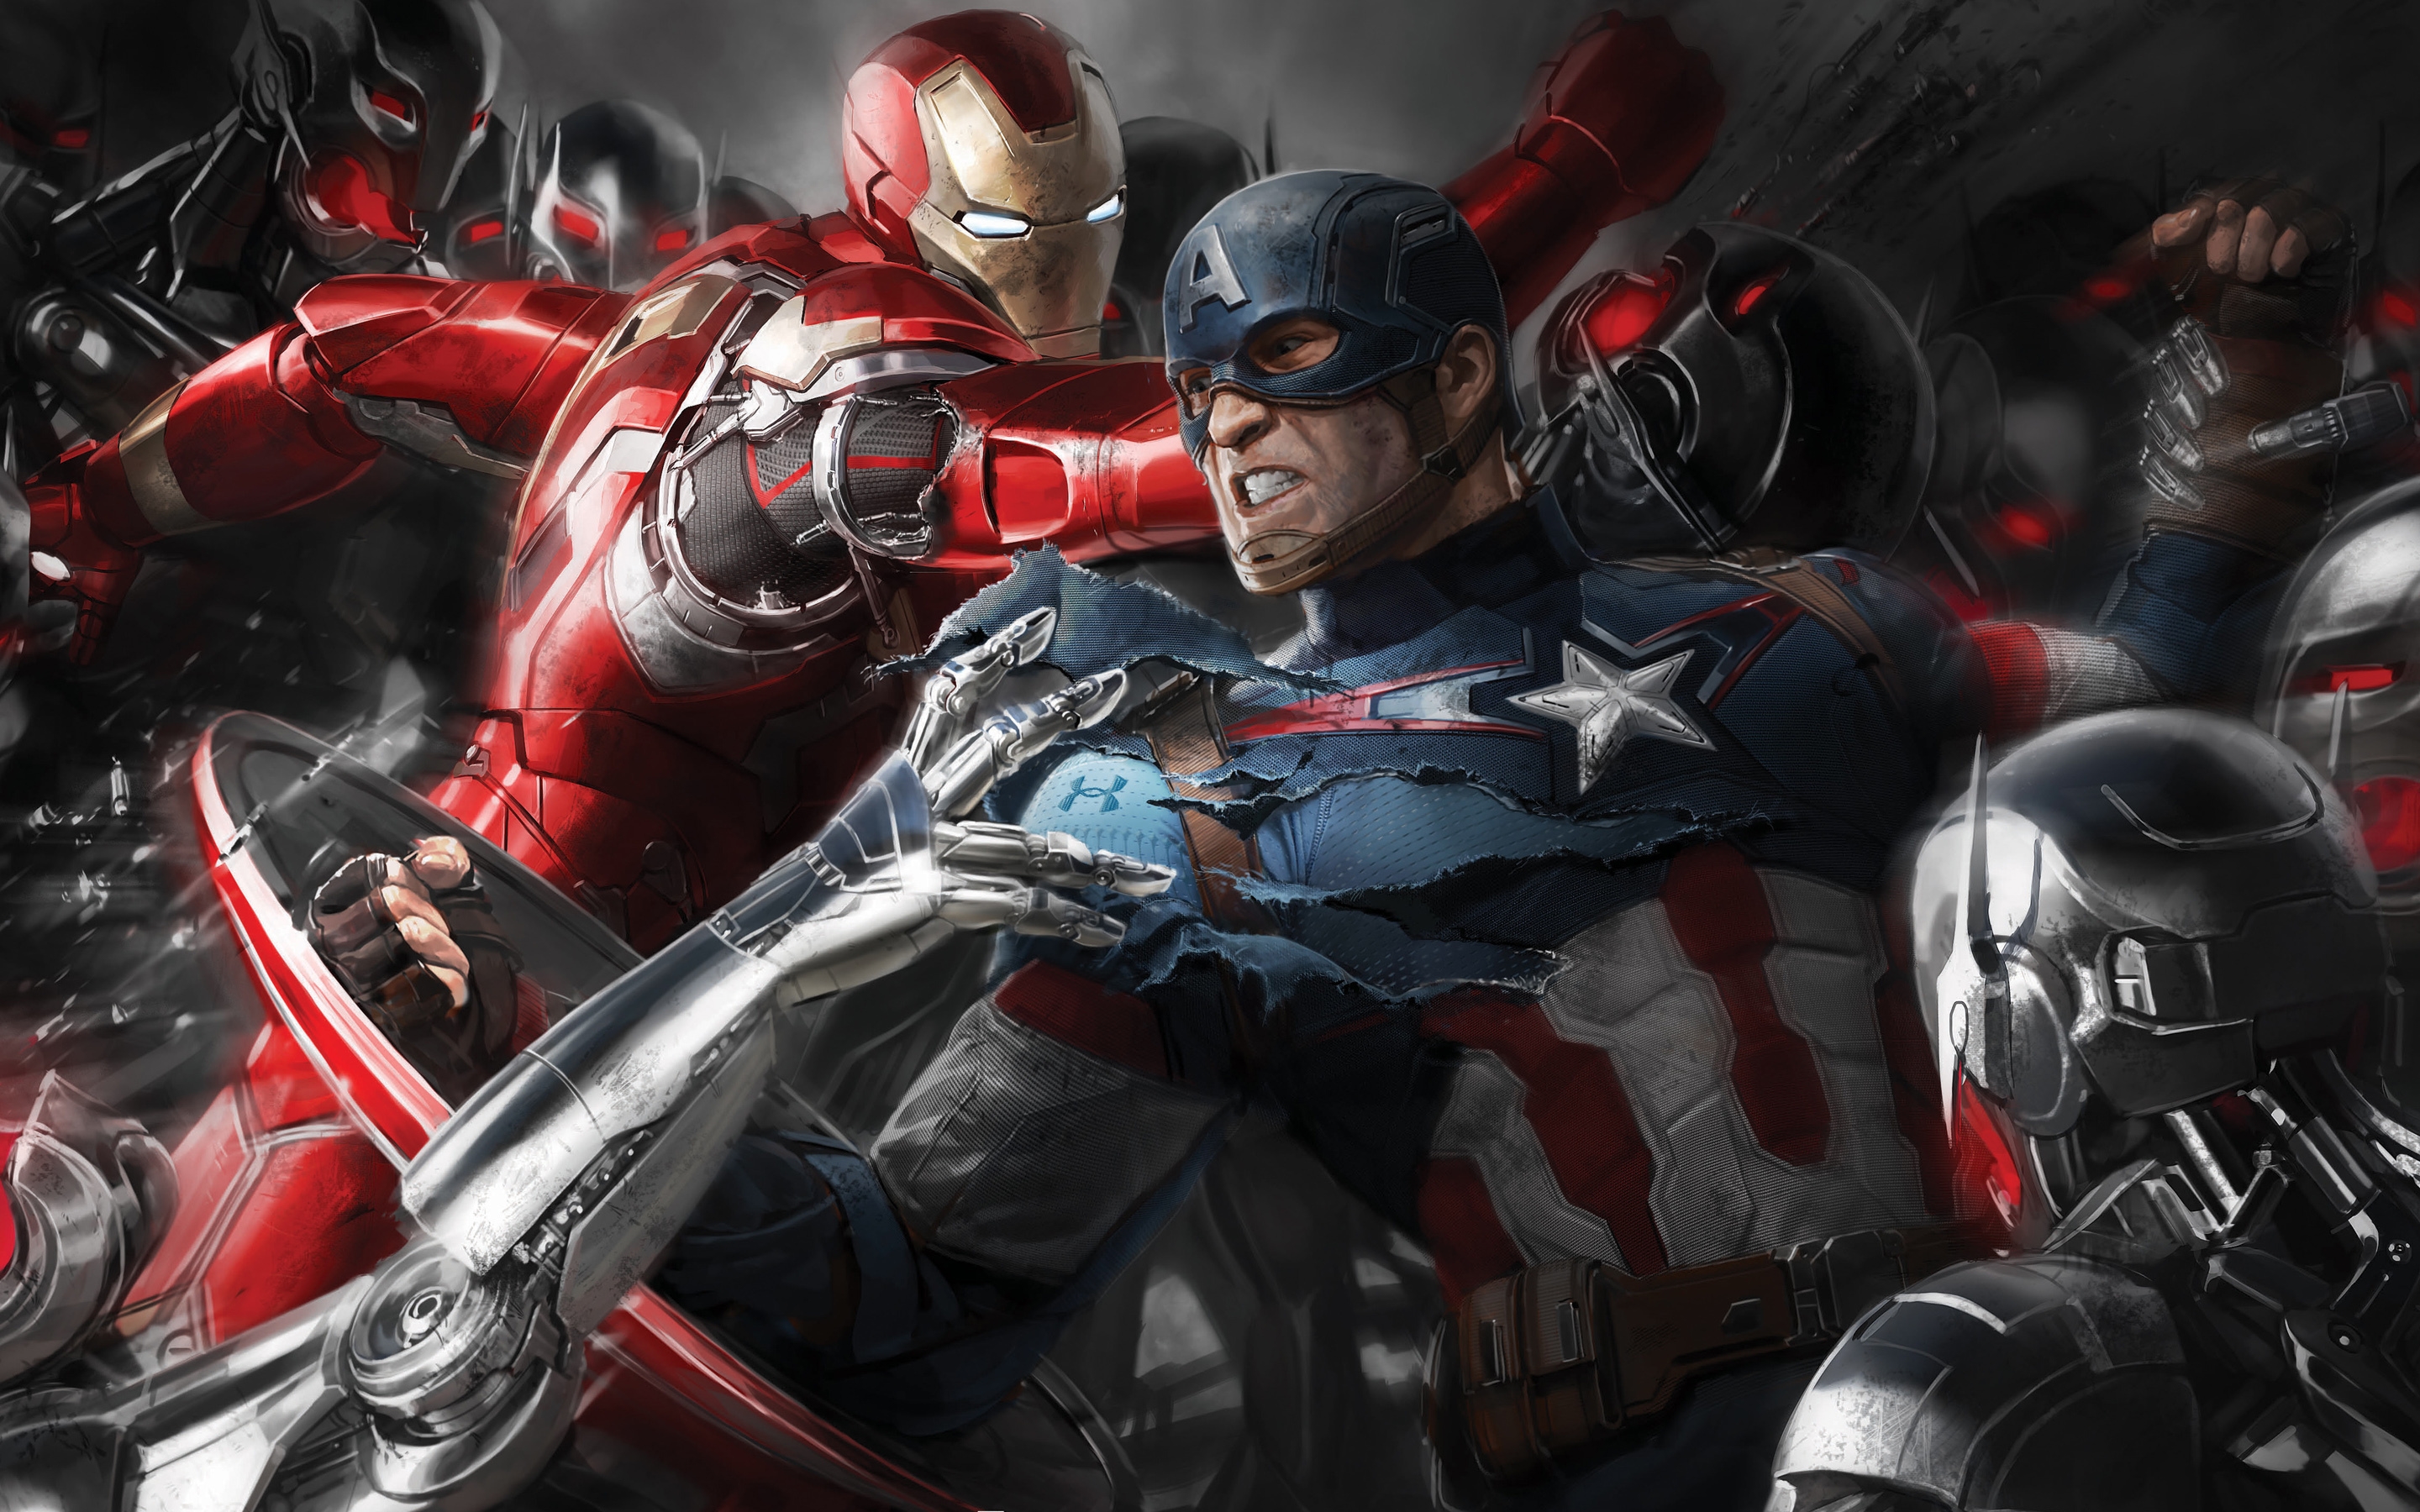 The Avengers Age of Ultron Superheroes for 2880 x 1800 Retina Display resolution